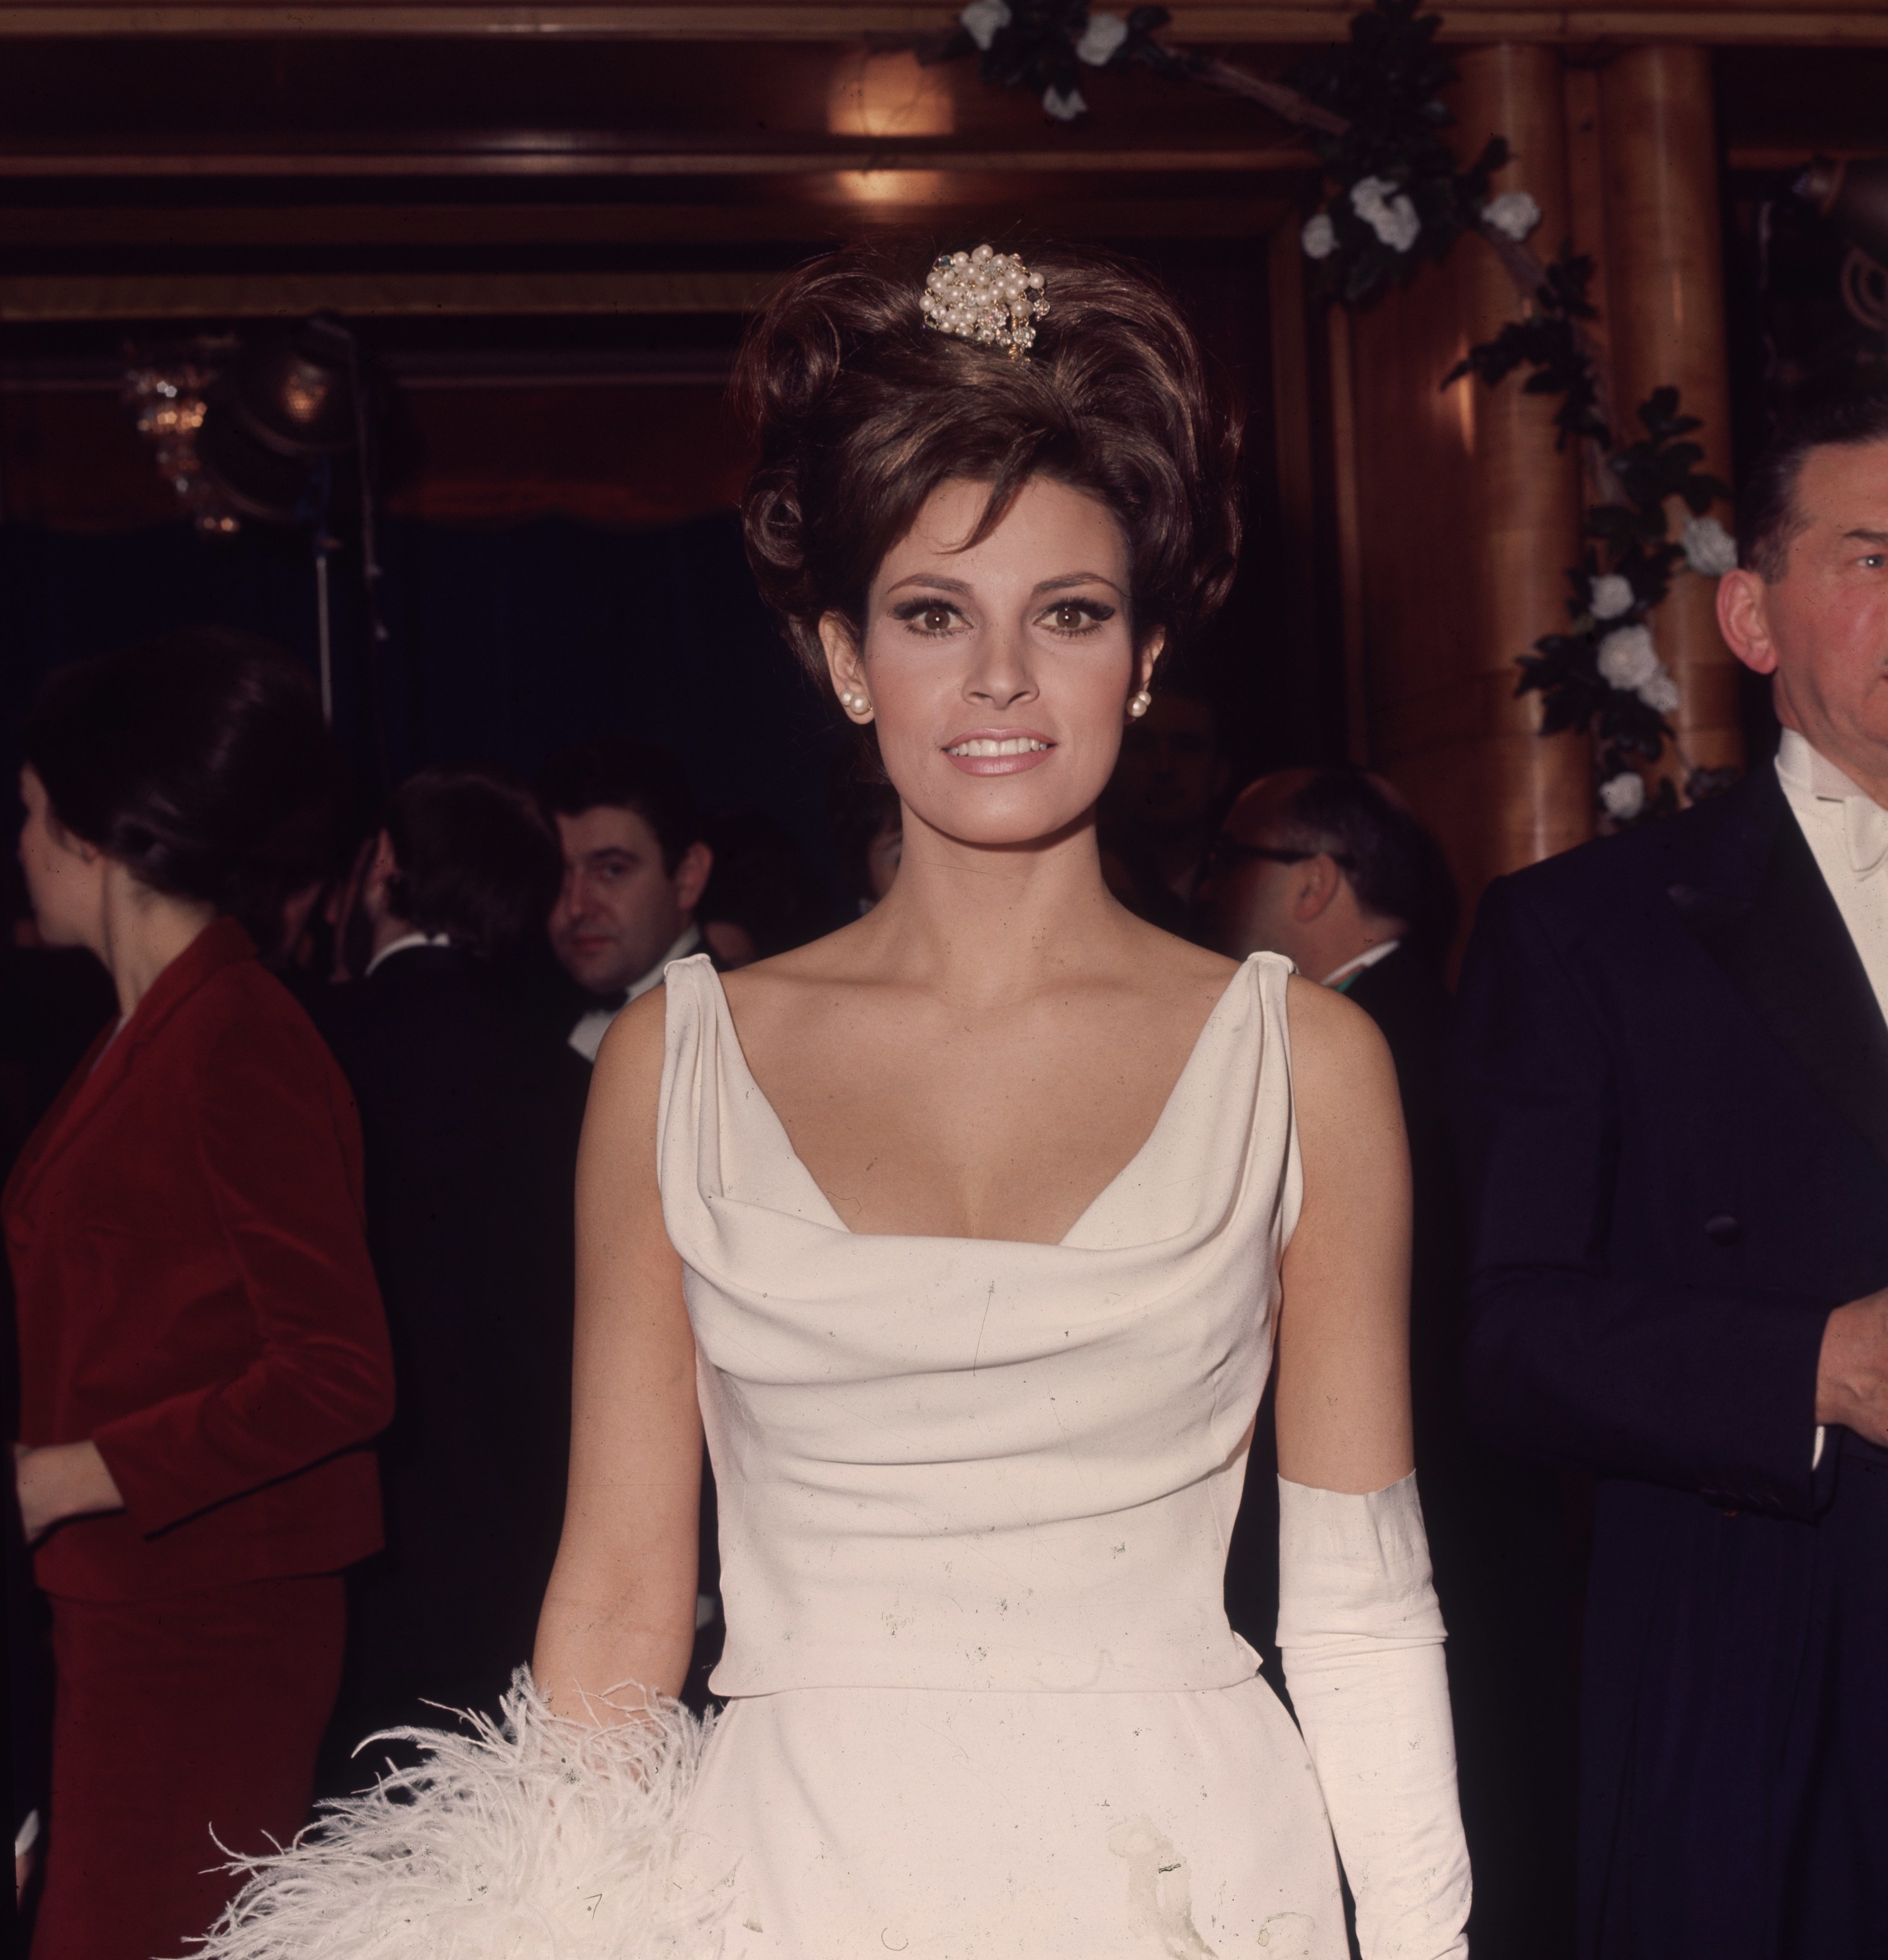 Raquel Welch appears at a Royal Film Performance event in March 1966